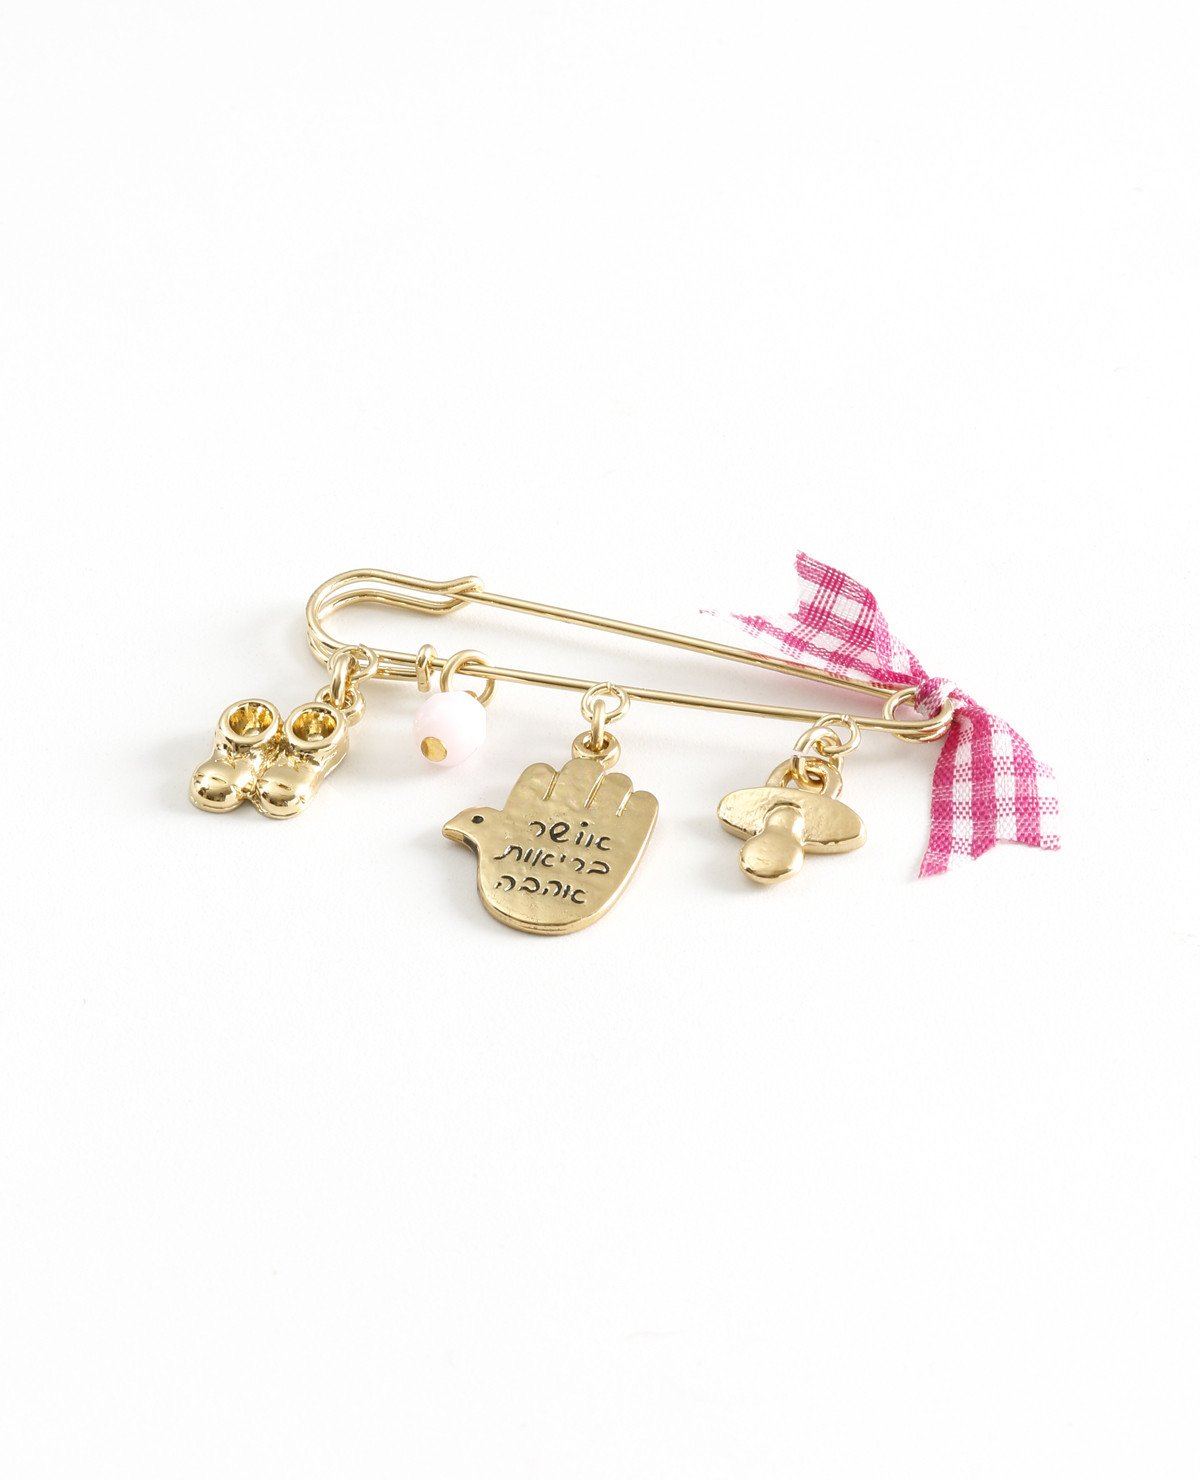 Baby Girl pin with cute elements, 24k gold plated.  Length: 4 cm  Width: 5 cm